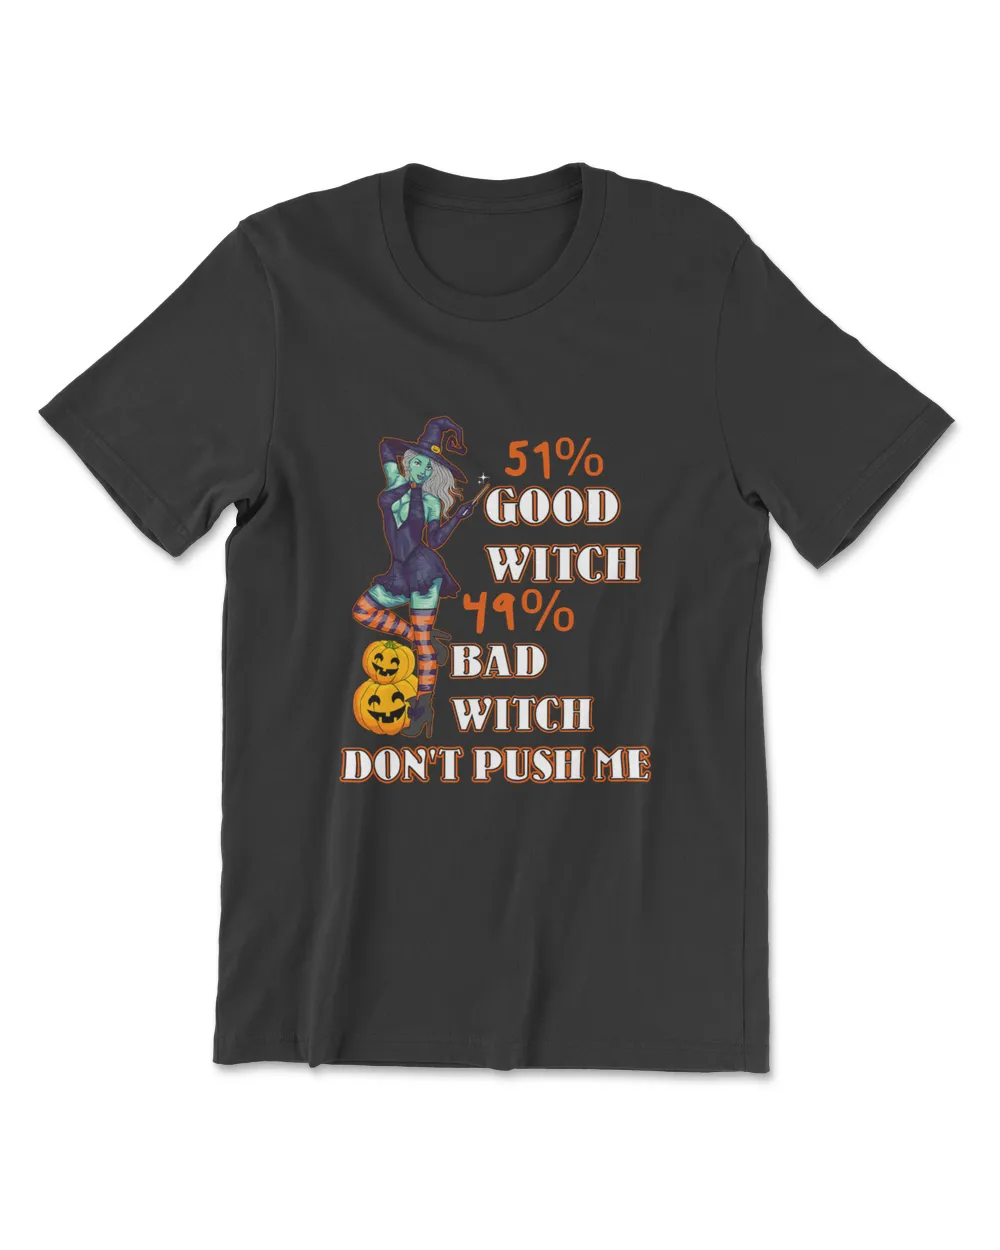 51 Good Witch 49 Bad Witch Funny Sexy Halloween Witch Gift T-Shirt